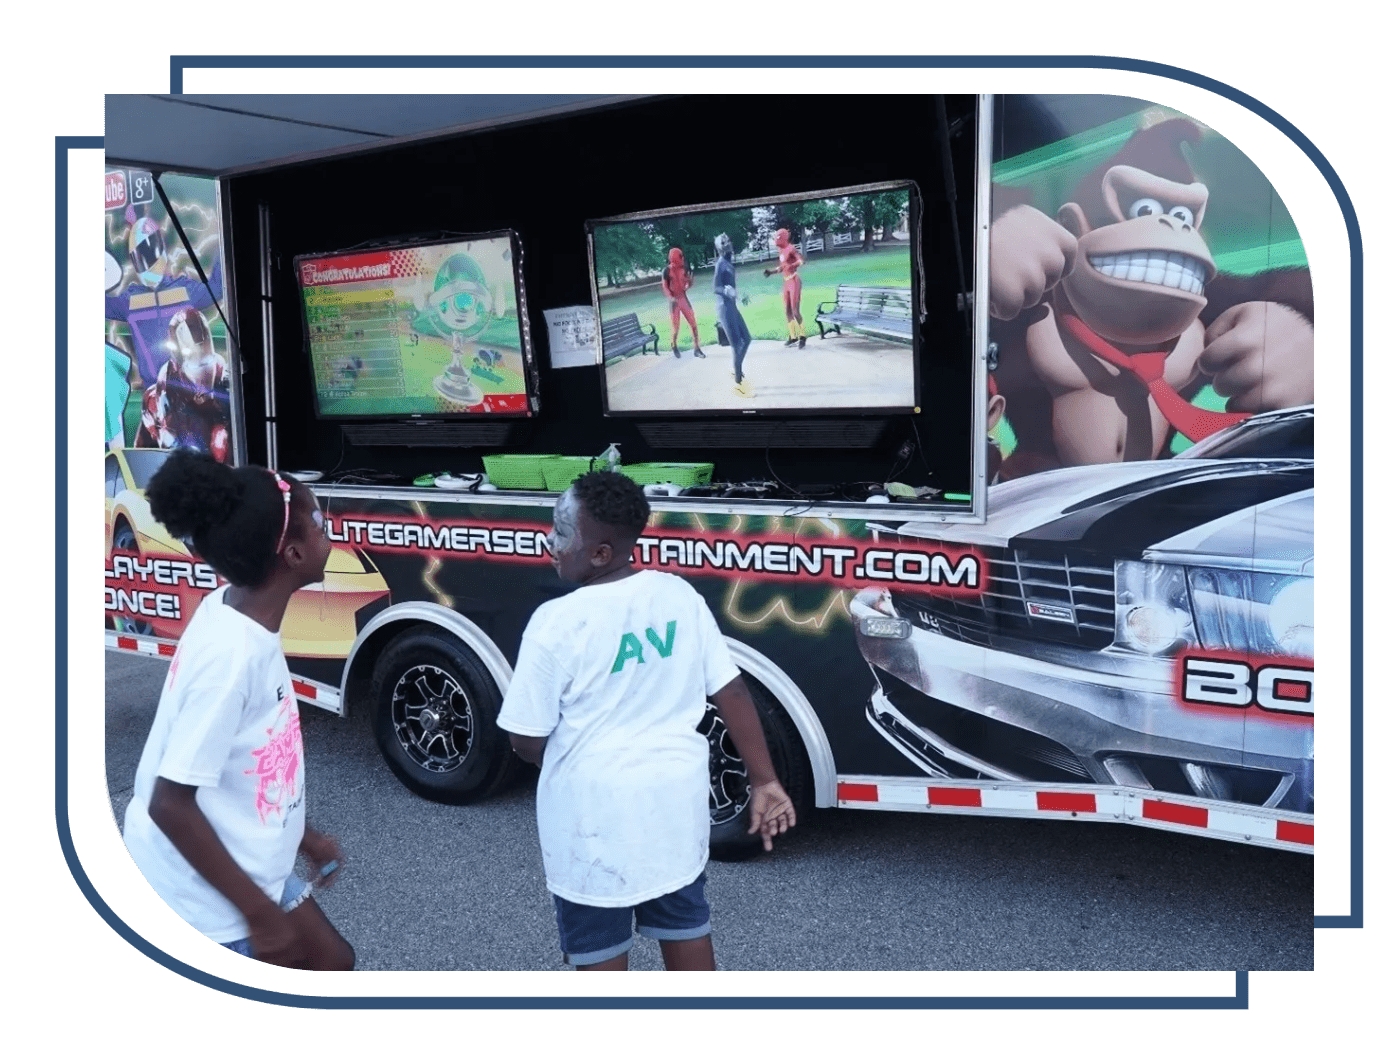 Two young boys standing in front of a television truck.